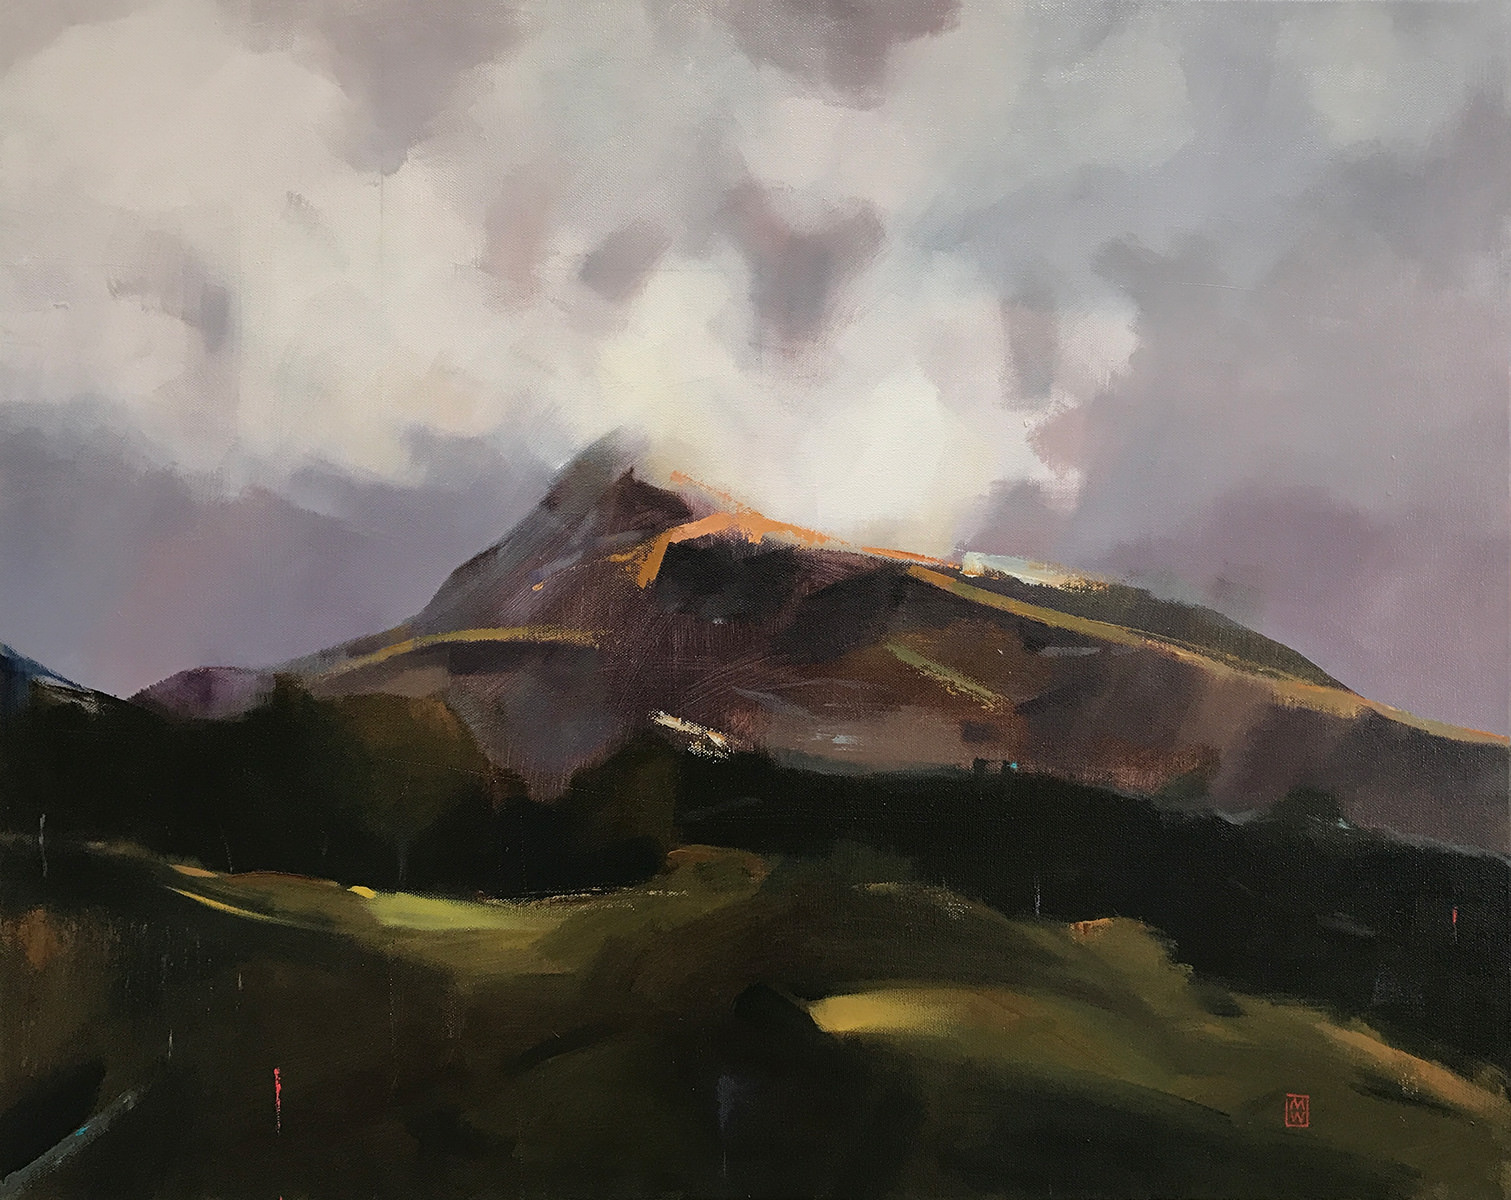 Moel Siabod, from Capel Curig by Martin Williams